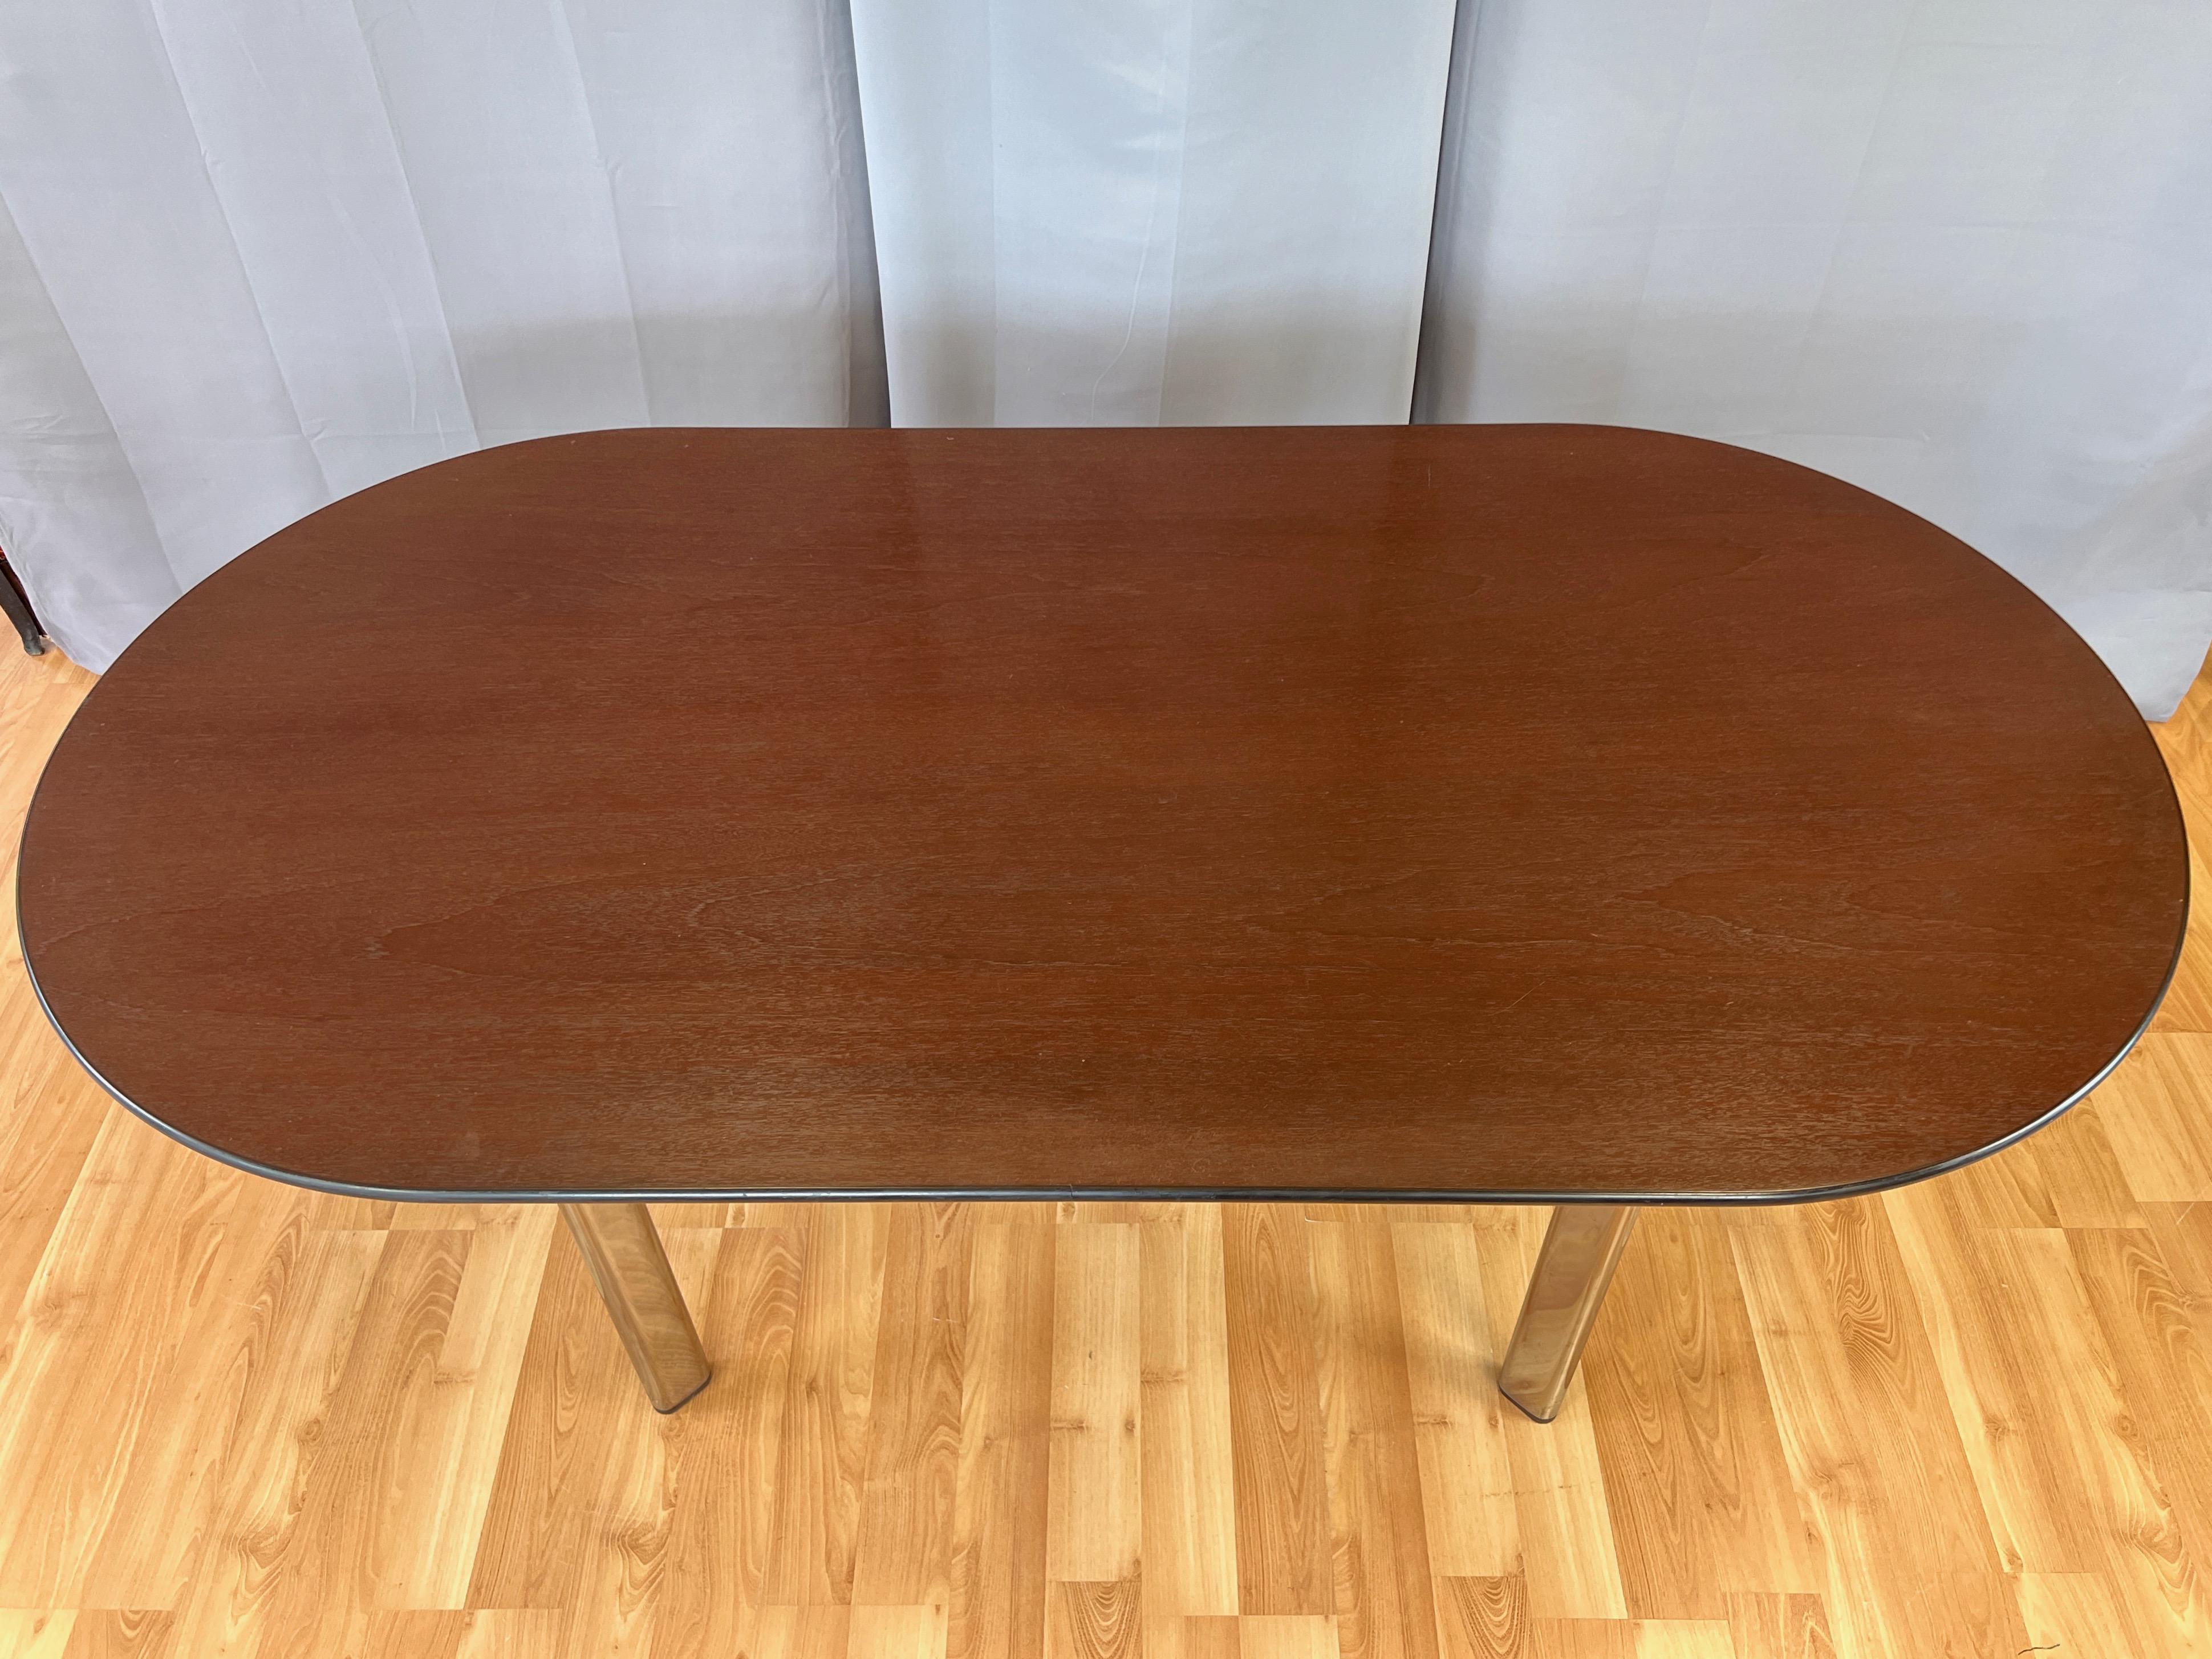 Late 20th Century Joseph D’Urso for Knoll High Table in American Cherry and Chrome, 1995 For Sale